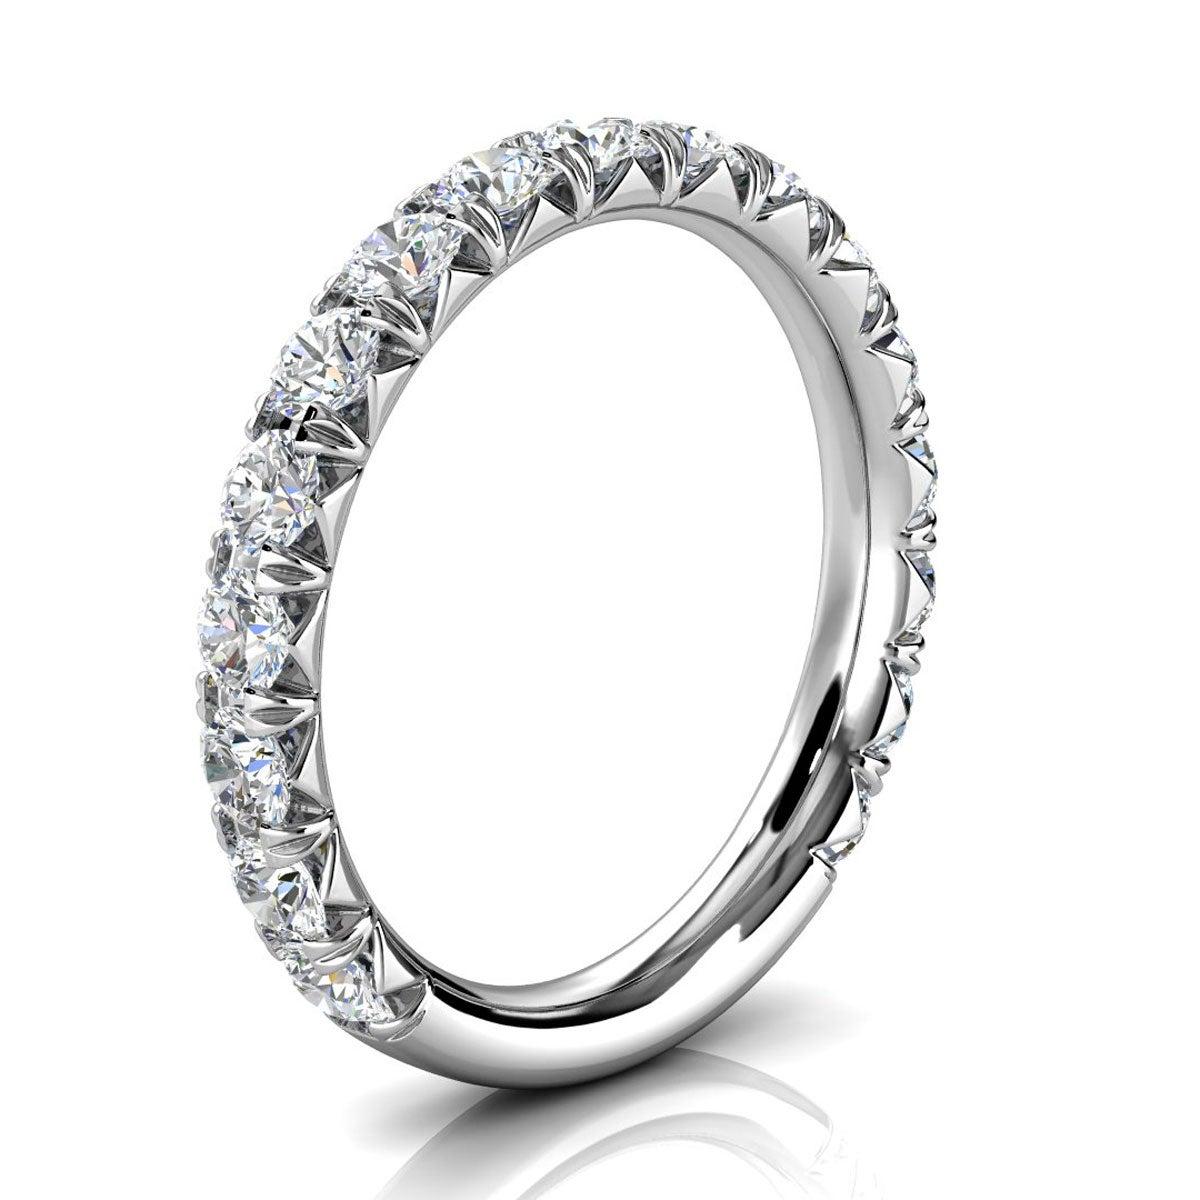 For Sale:  14k White Gold GIA French Pave Diamond Ring '1 Ct. Tw' 2